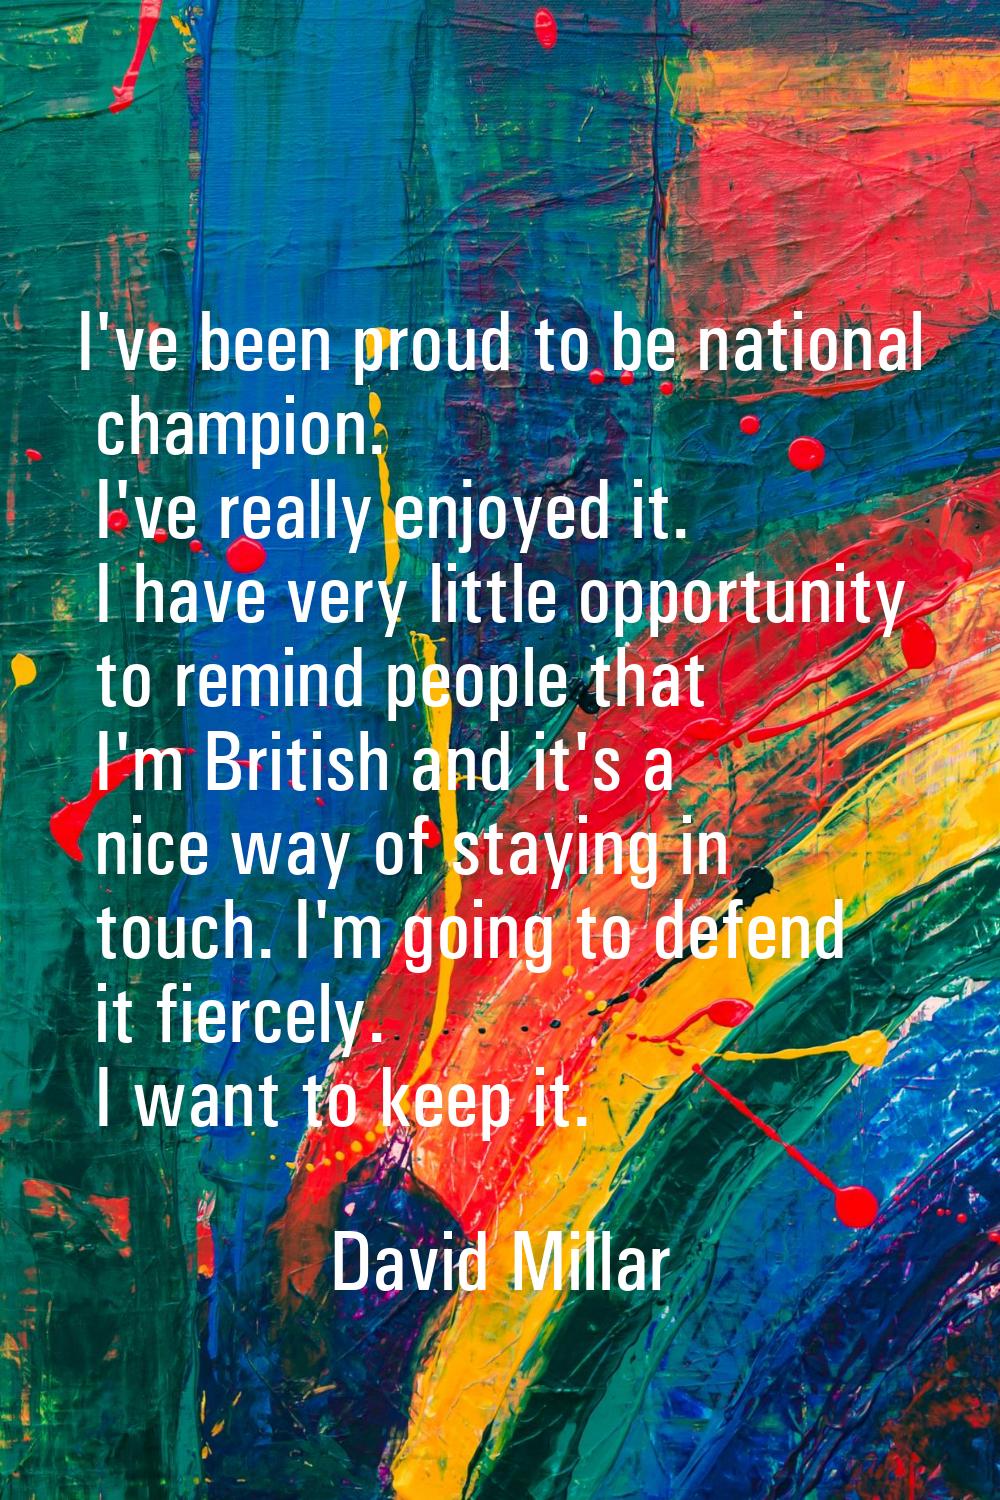 I've been proud to be national champion. I've really enjoyed it. I have very little opportunity to 